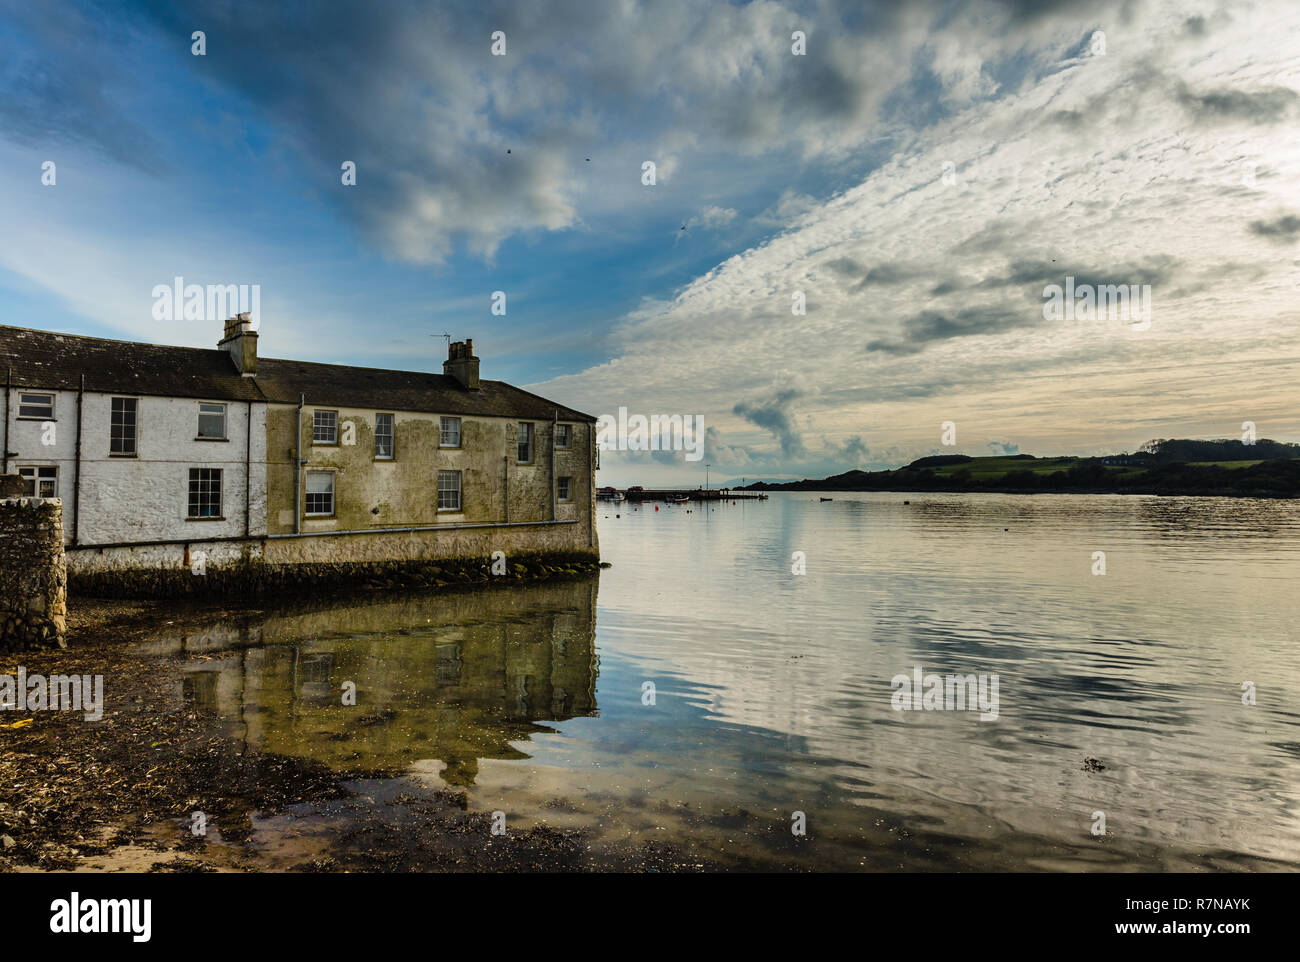 Isola di Whithorn Harbour, Dumfries and Galloway, Scozia. Foto Stock